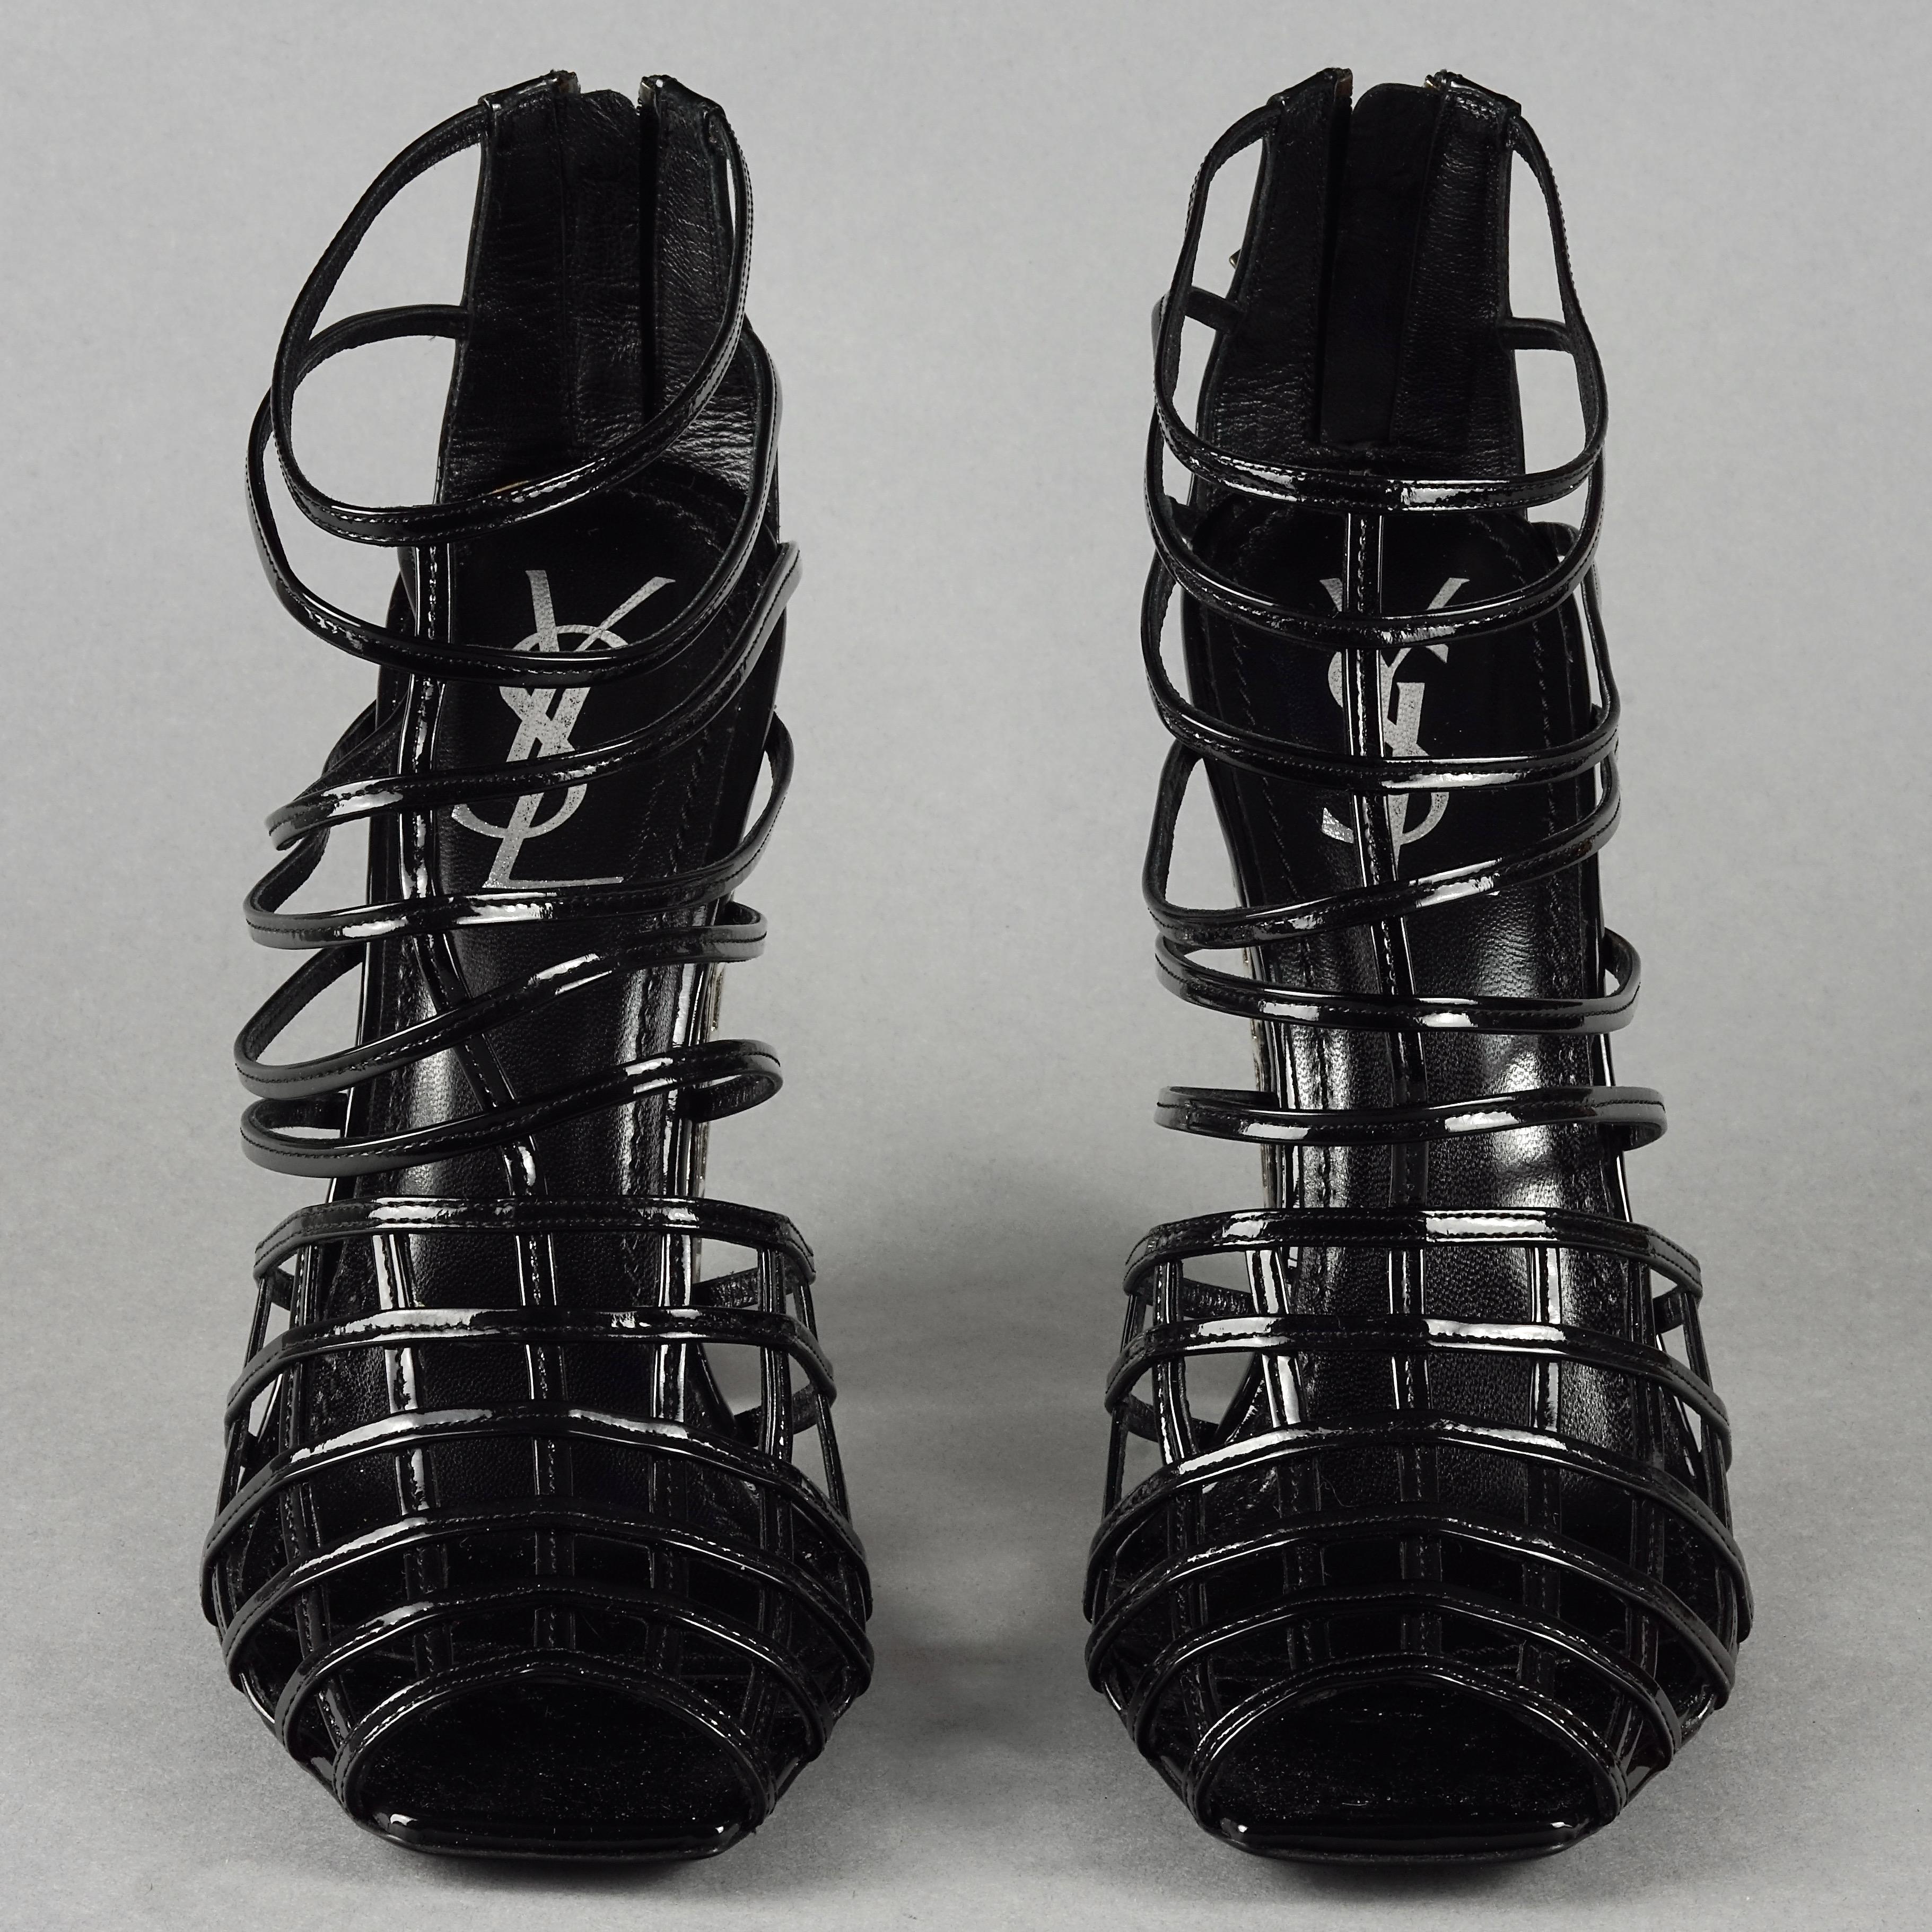 Black S/S2009 YVES SAINT LAURENT Ysl Cage Heel Ankle Boots For Sale